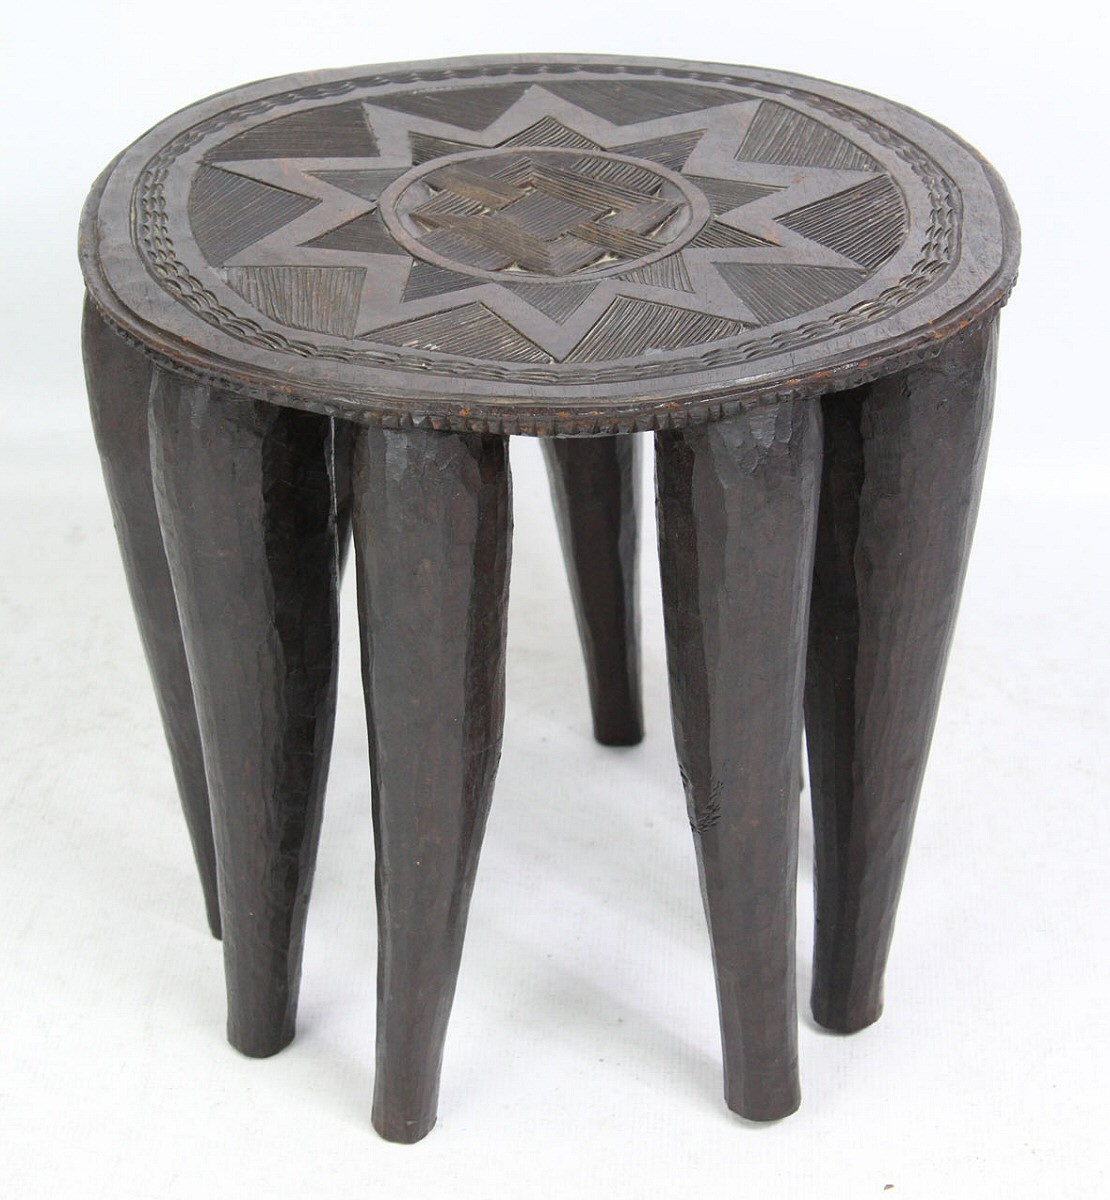 Nupe tribe Stool